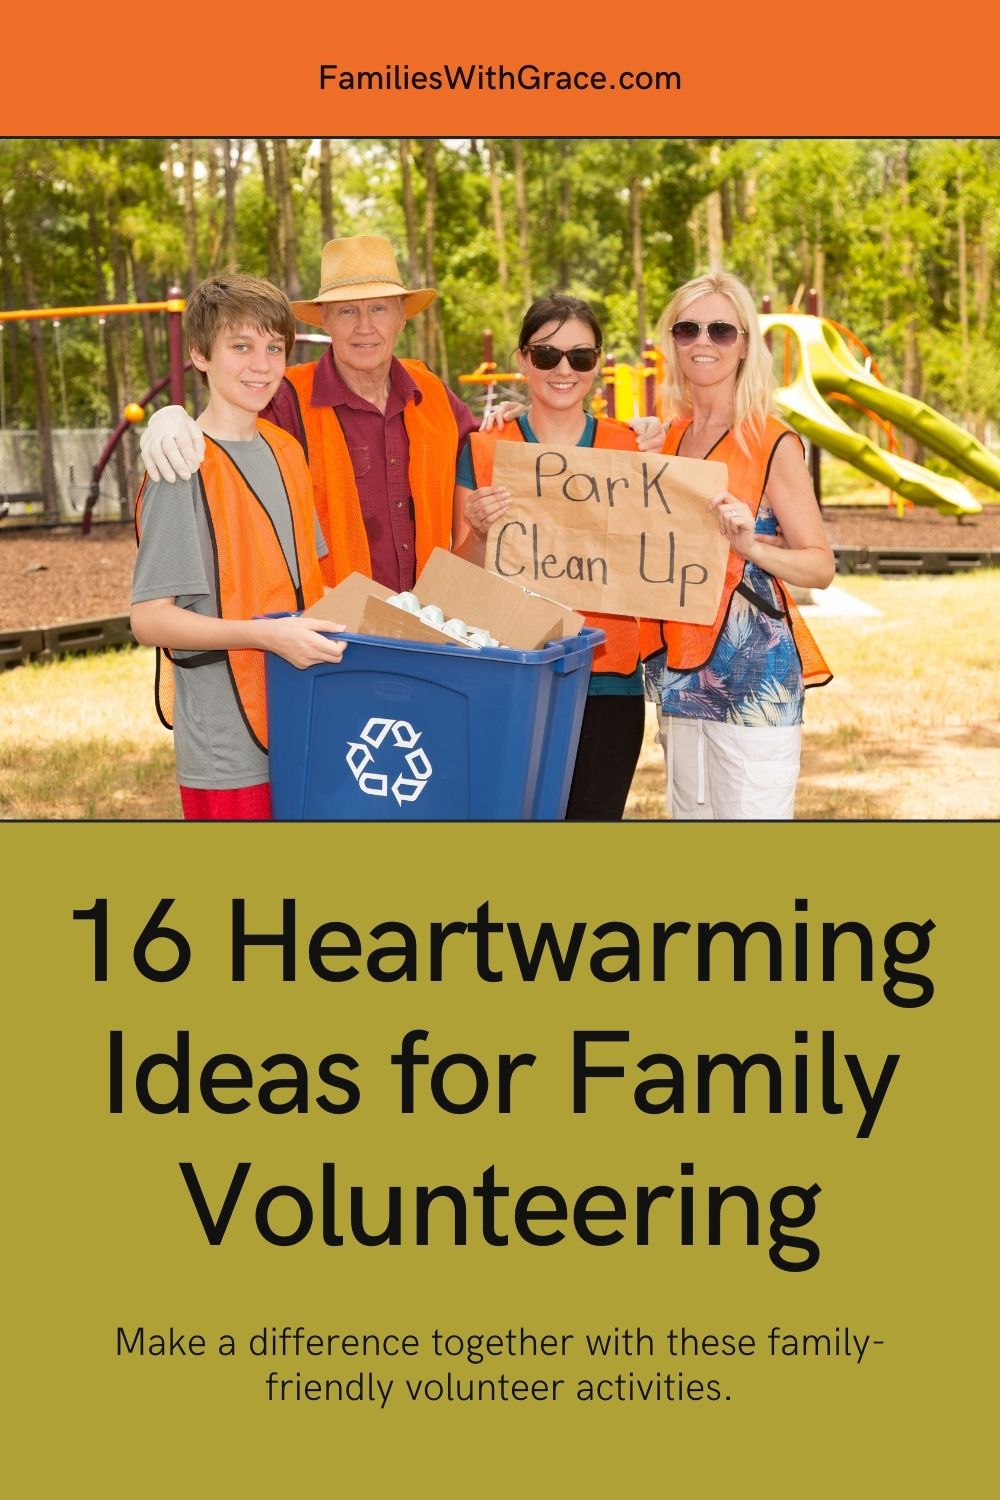 16 Volunteer ideas for families to do together